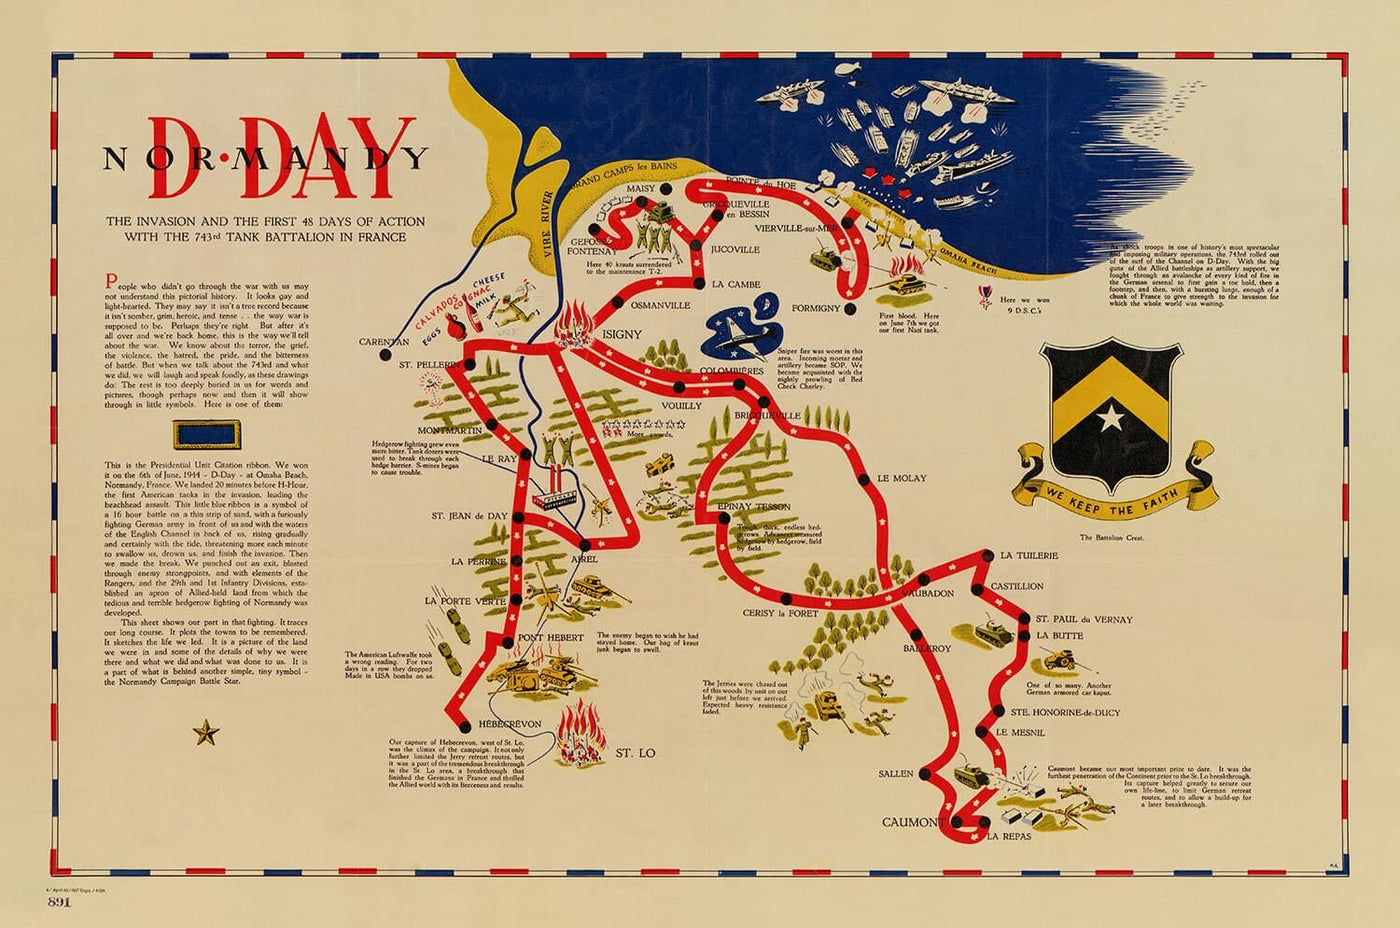 Old Map of D Day Landings in Normandy, 1944 - 743rd Tank Battalion in Northern France - US Army World War 2